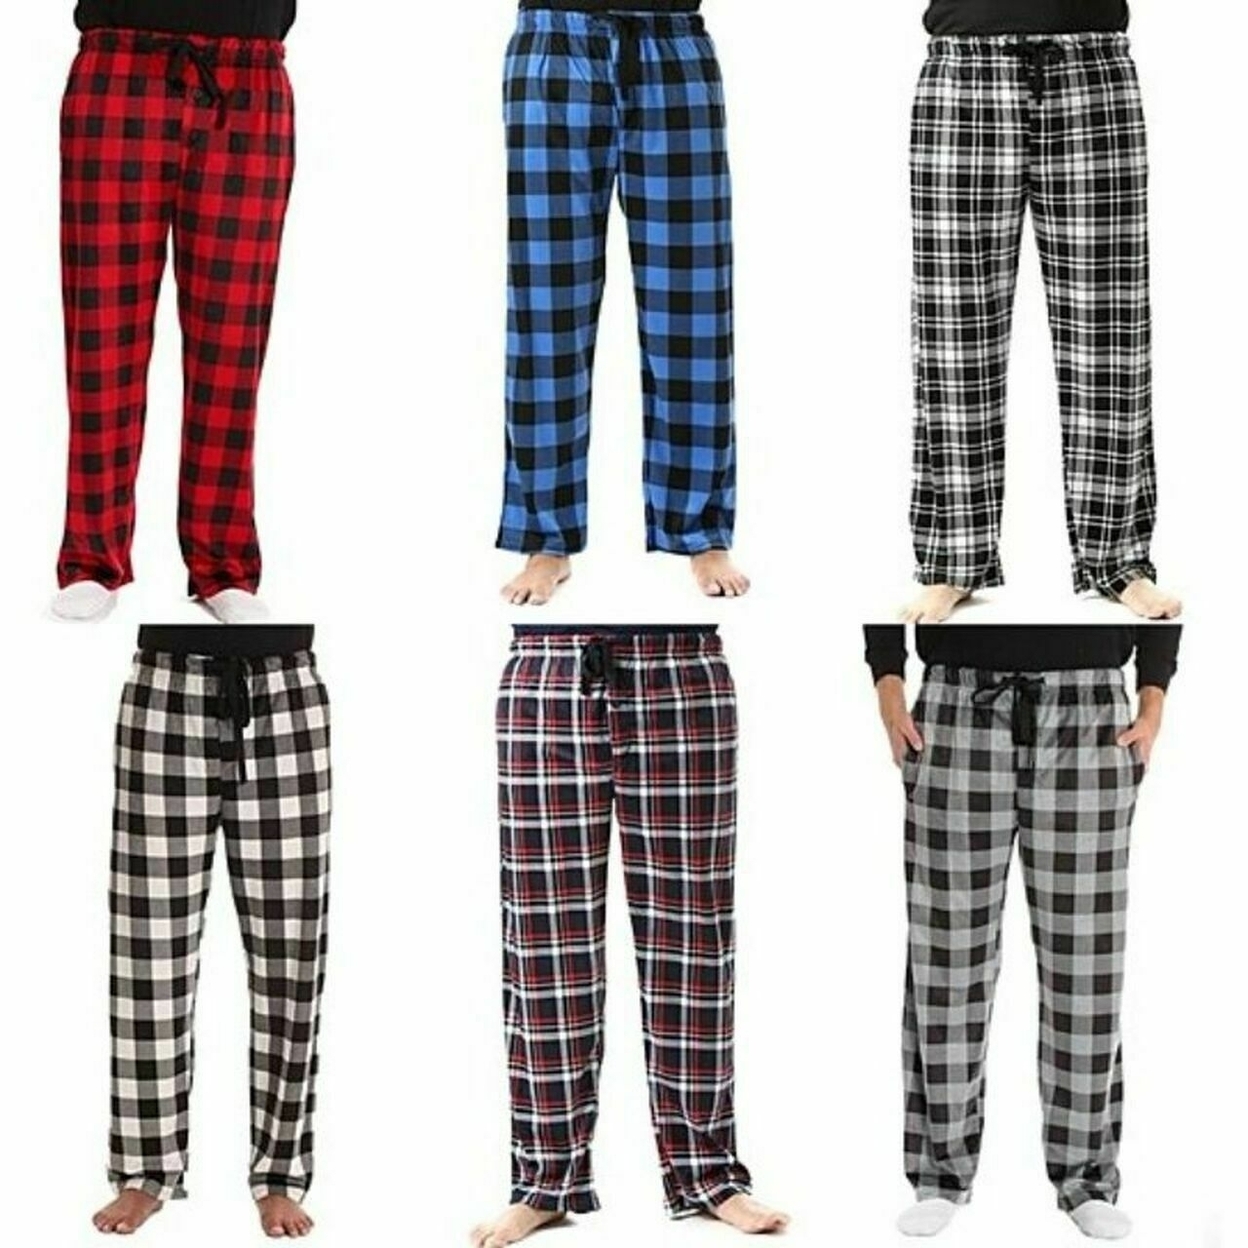 2-Pack: Men's Ultra Soft Cozy Flannel Fleece Plaid Pajama Sleep Bottom Lounge Pants - Red & Red, X-large